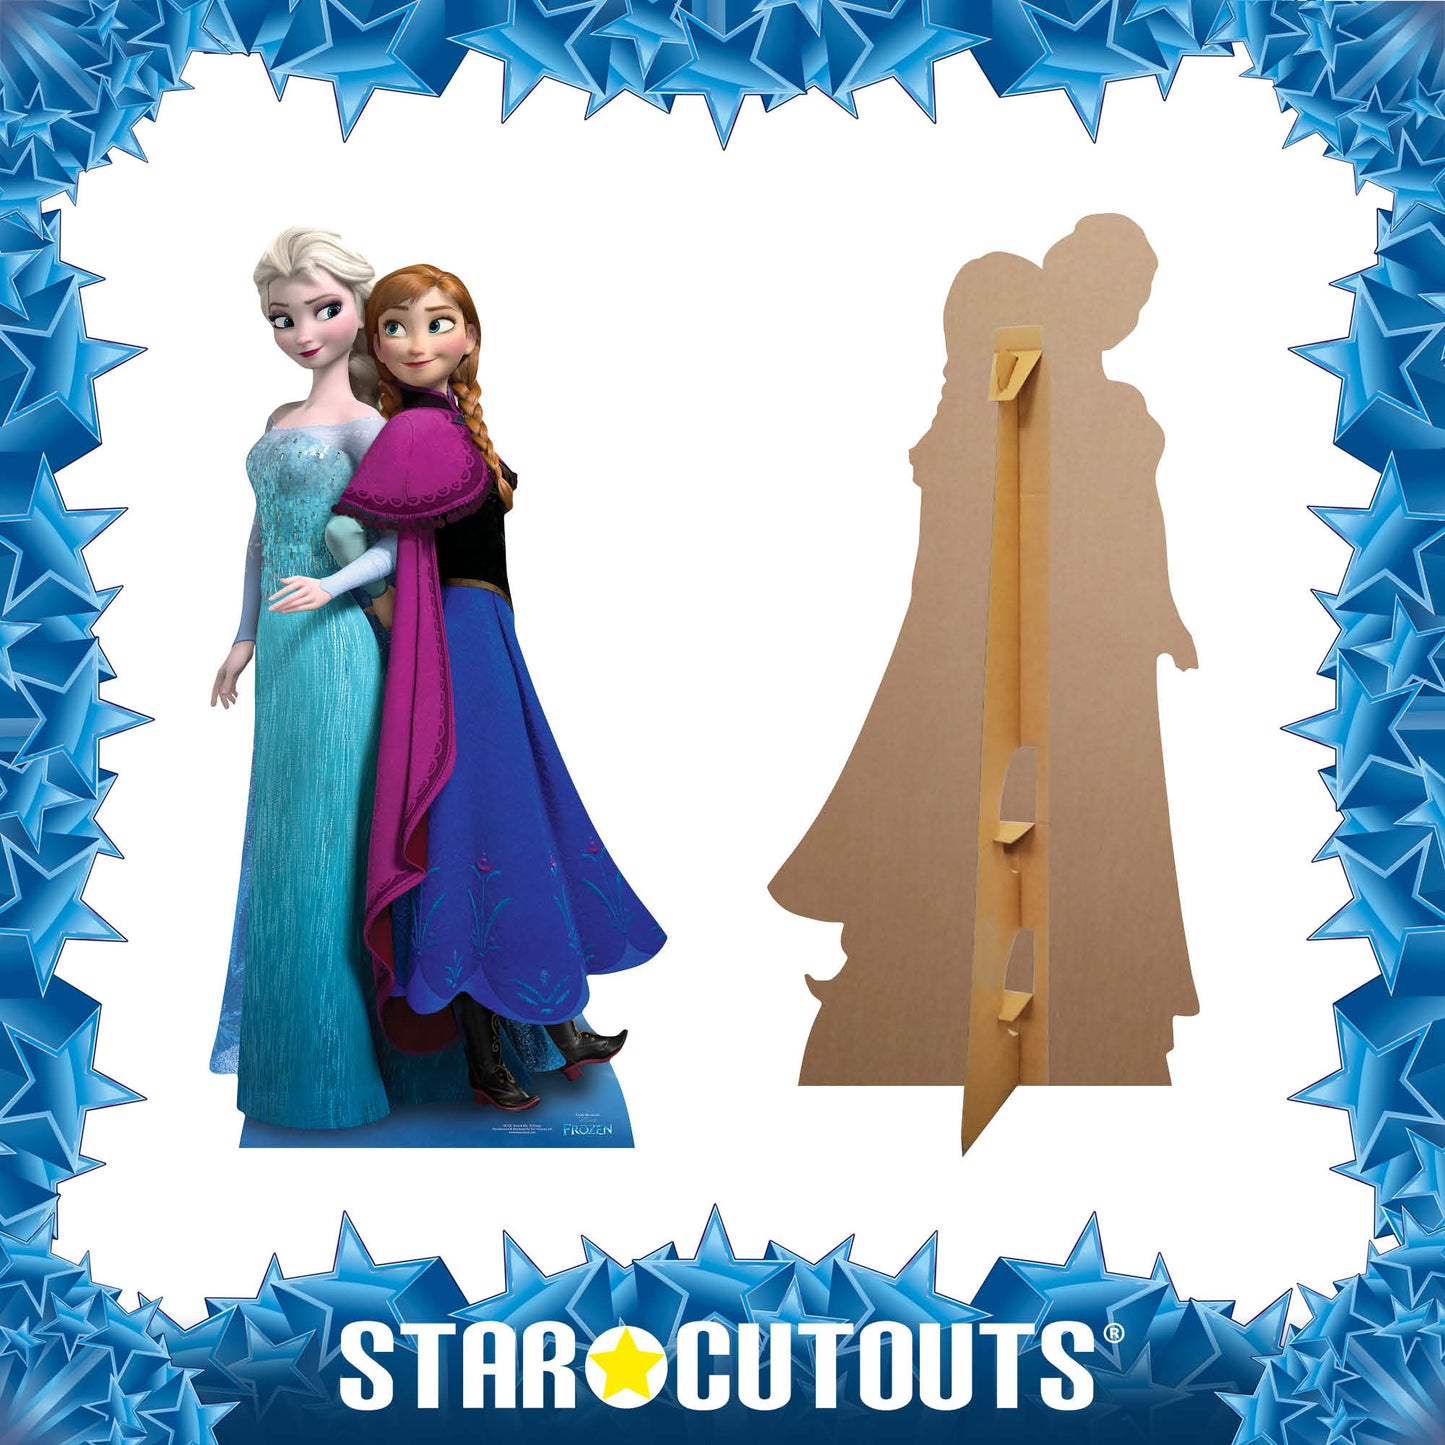 Frozen Anna and Elsa Sisters Cardboard Cutout